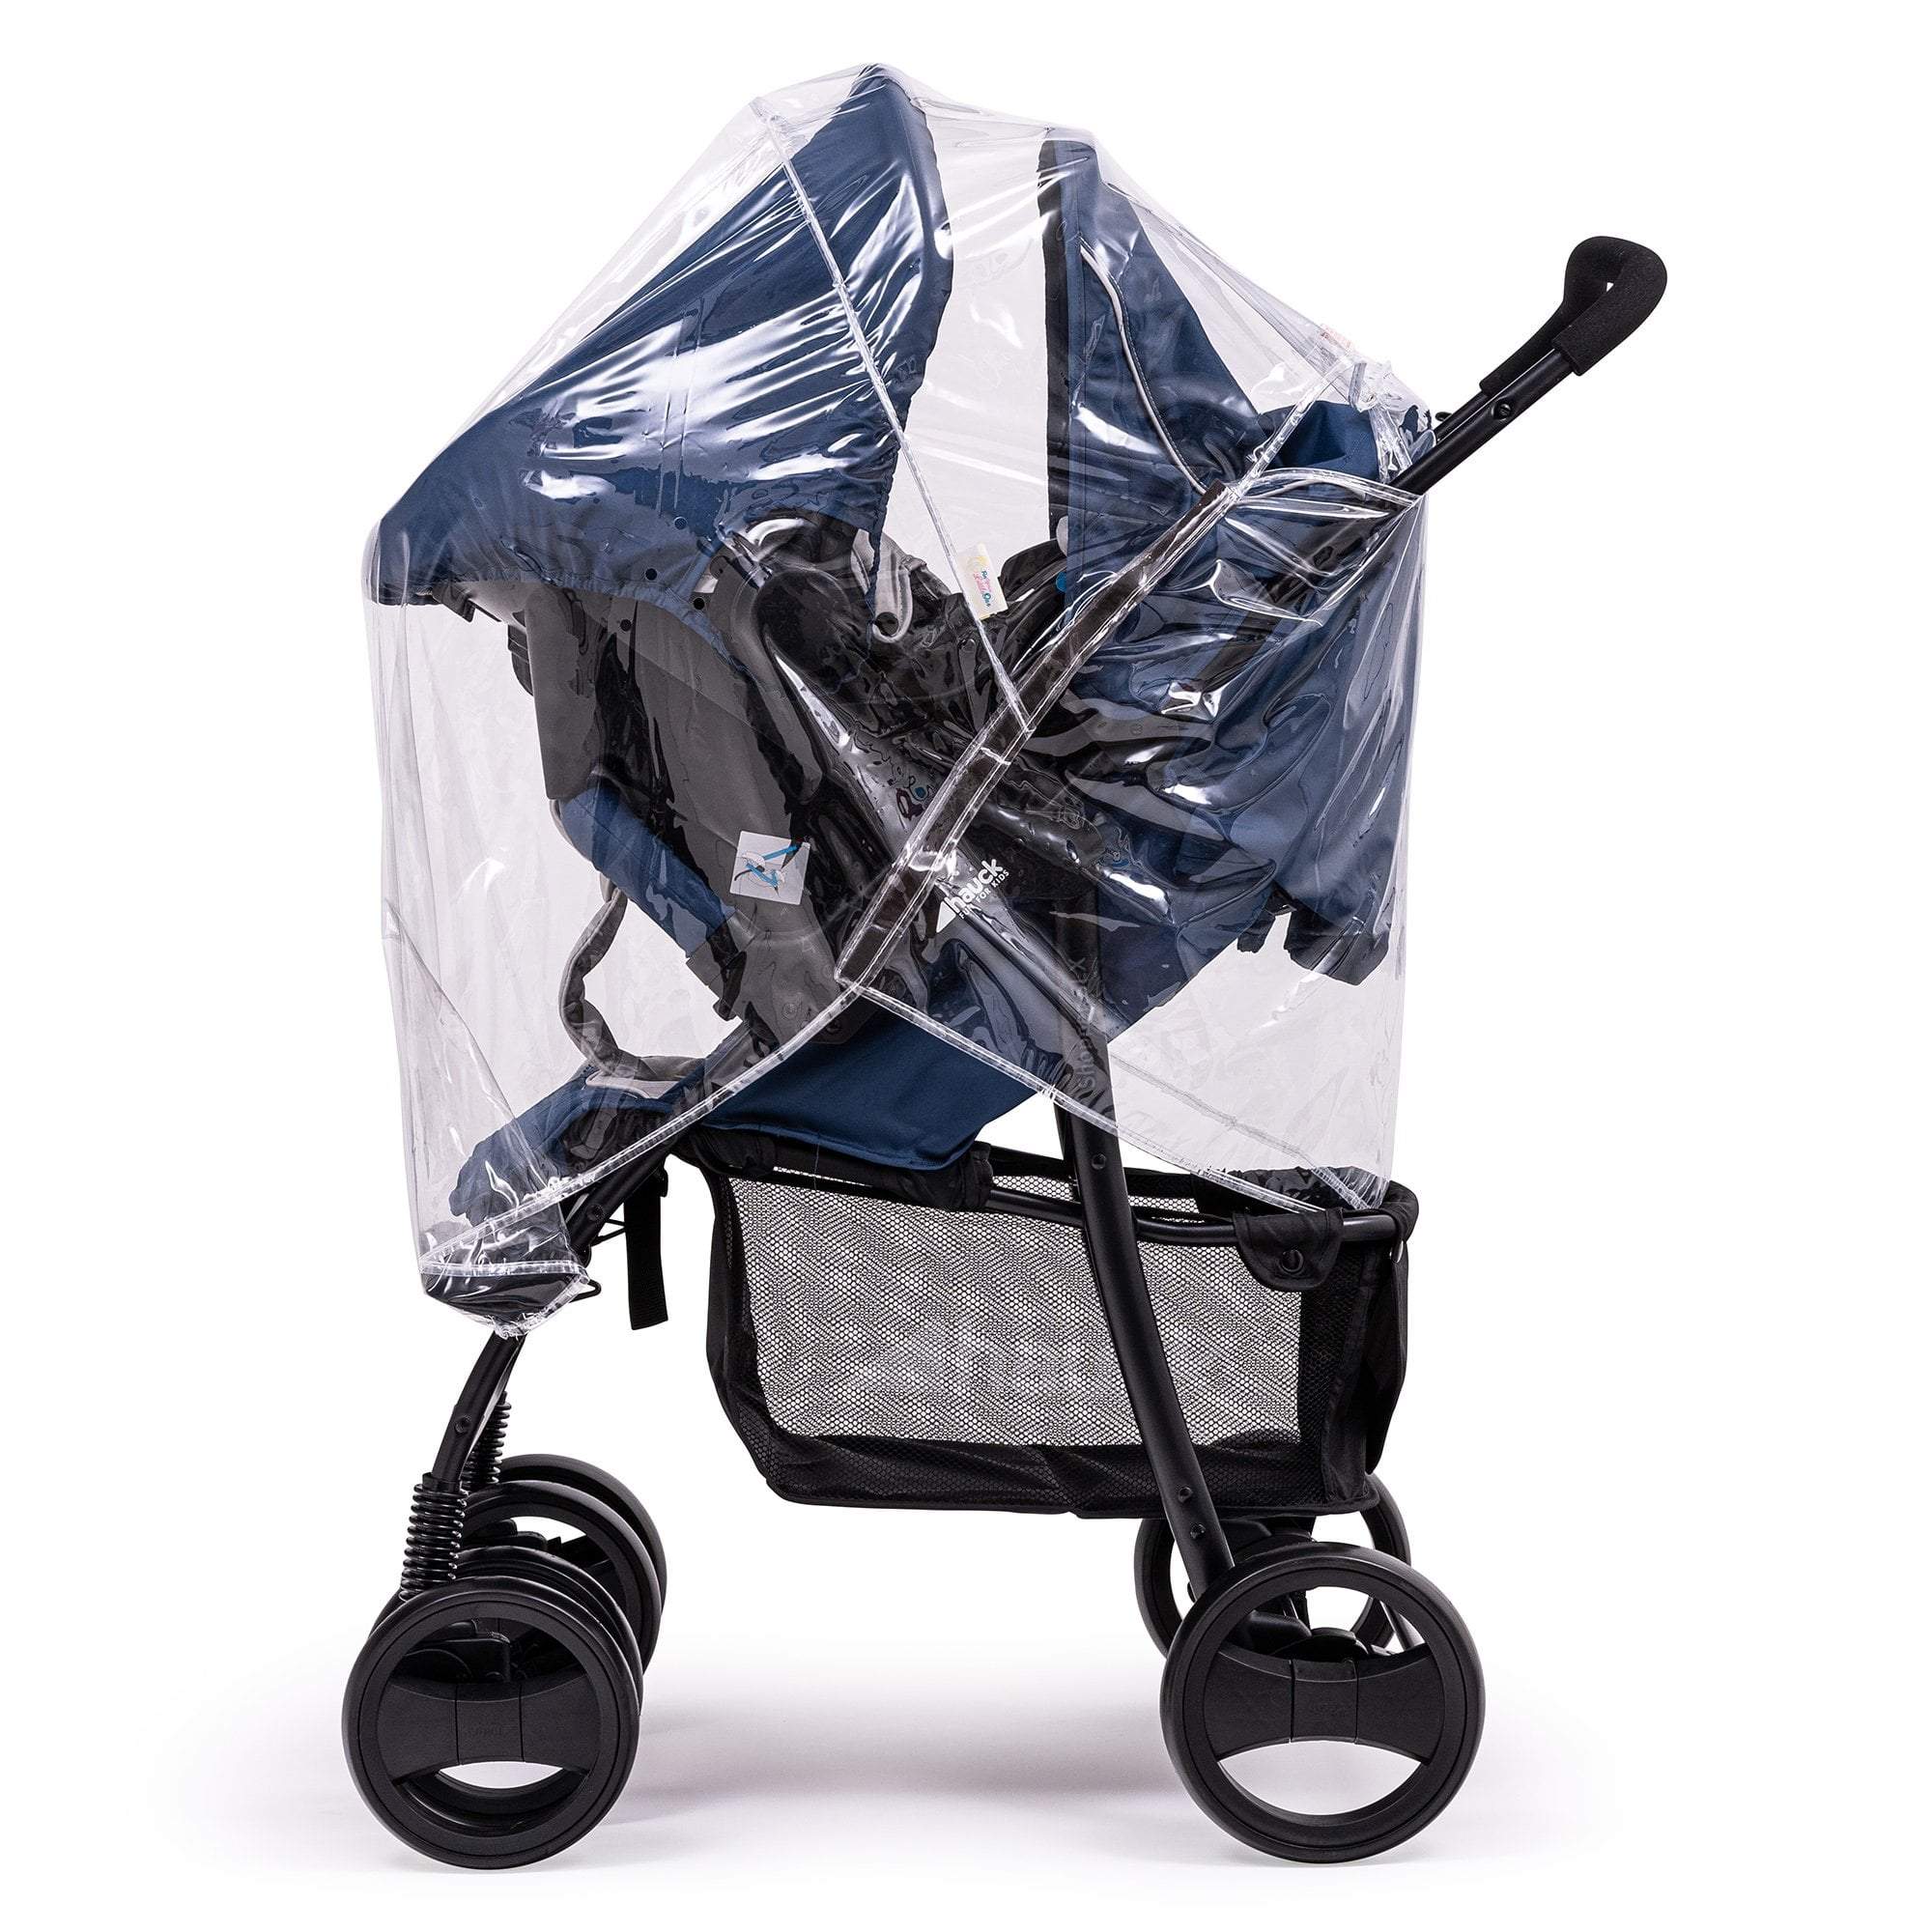 Travel System Raincover Compatible with Maclaren - Fits All Models - For Your Little One